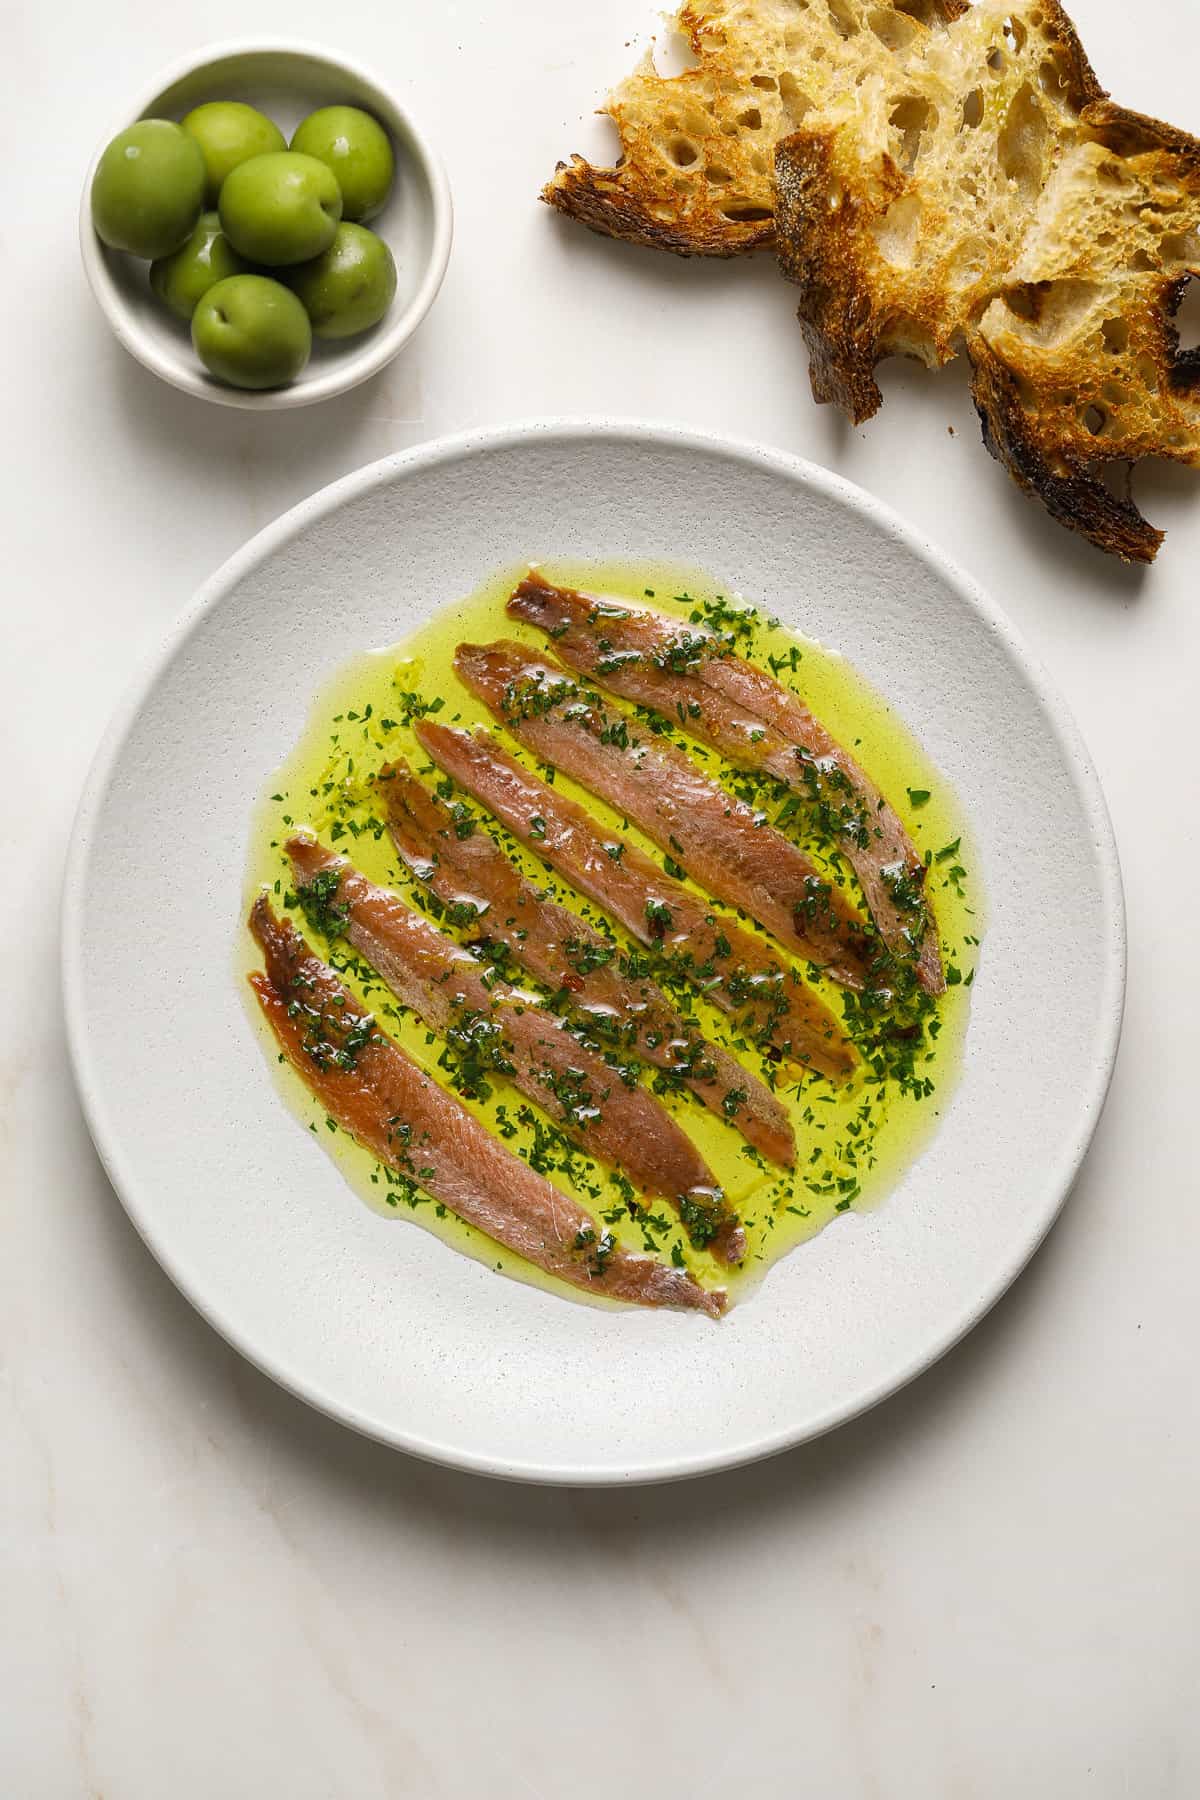 A plate of anchovies drenched in olive oil and herbs with sliced bread on the side and a small bowl of green olives.